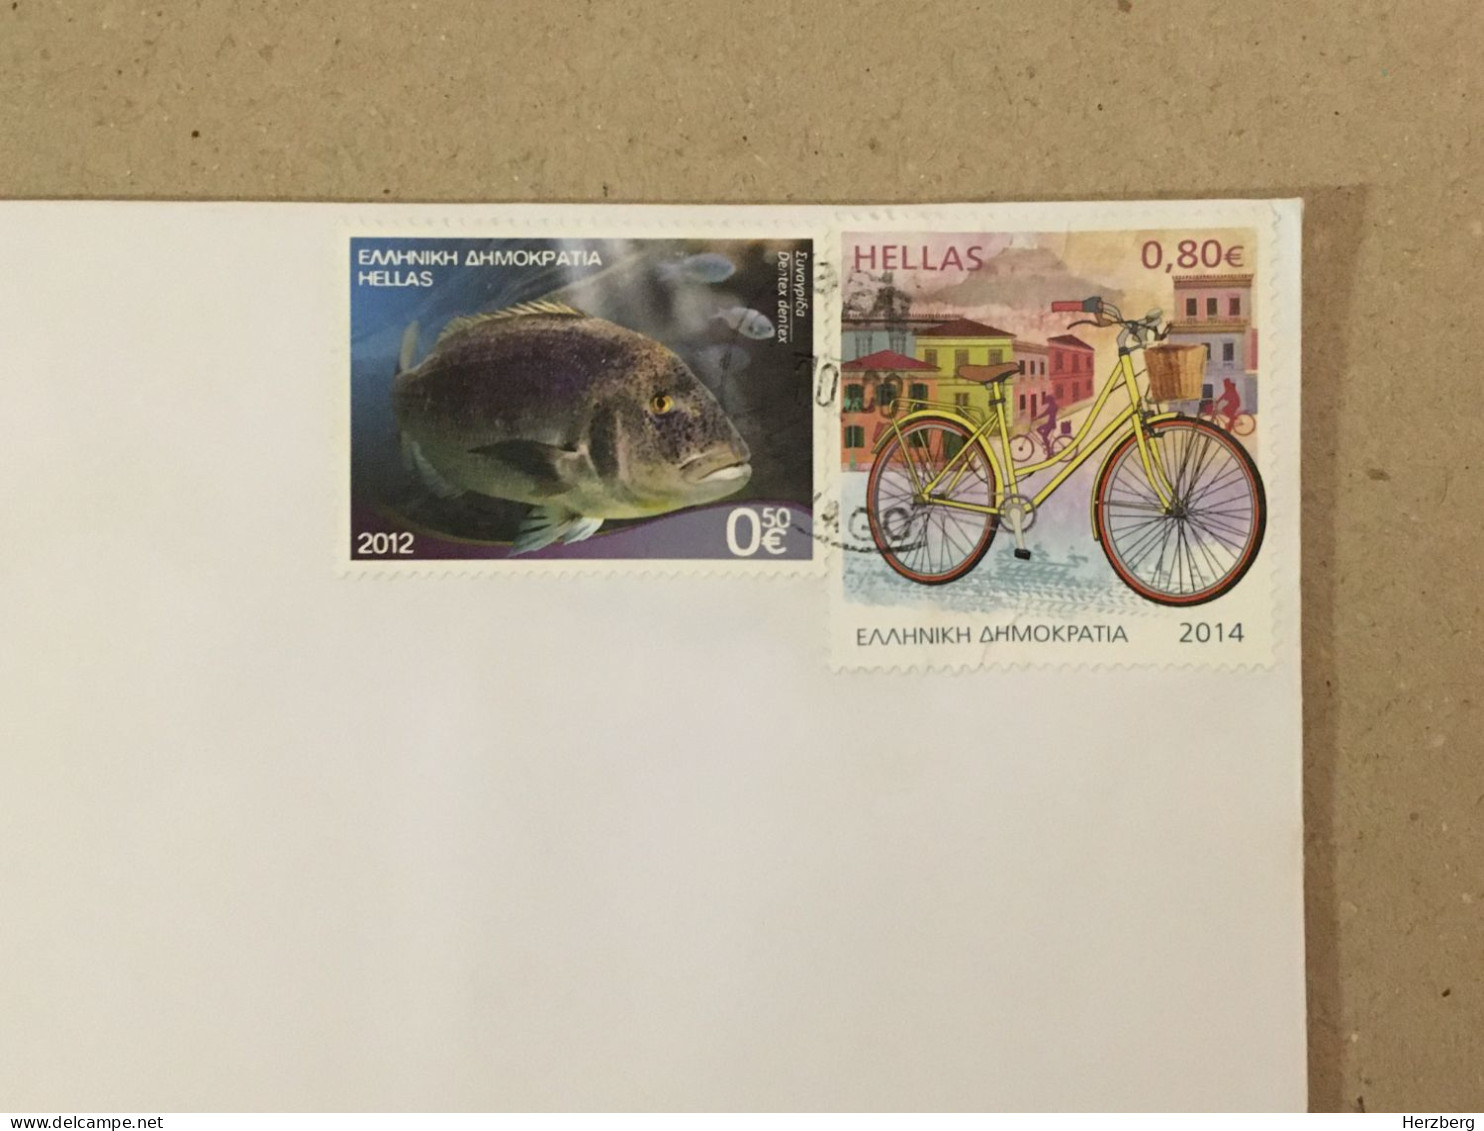 Greece Hellas Used Letter Circulated Cover Stamp Velo Bicycle Cycling Radfahren The Toothed Fish 2015 - Covers & Documents